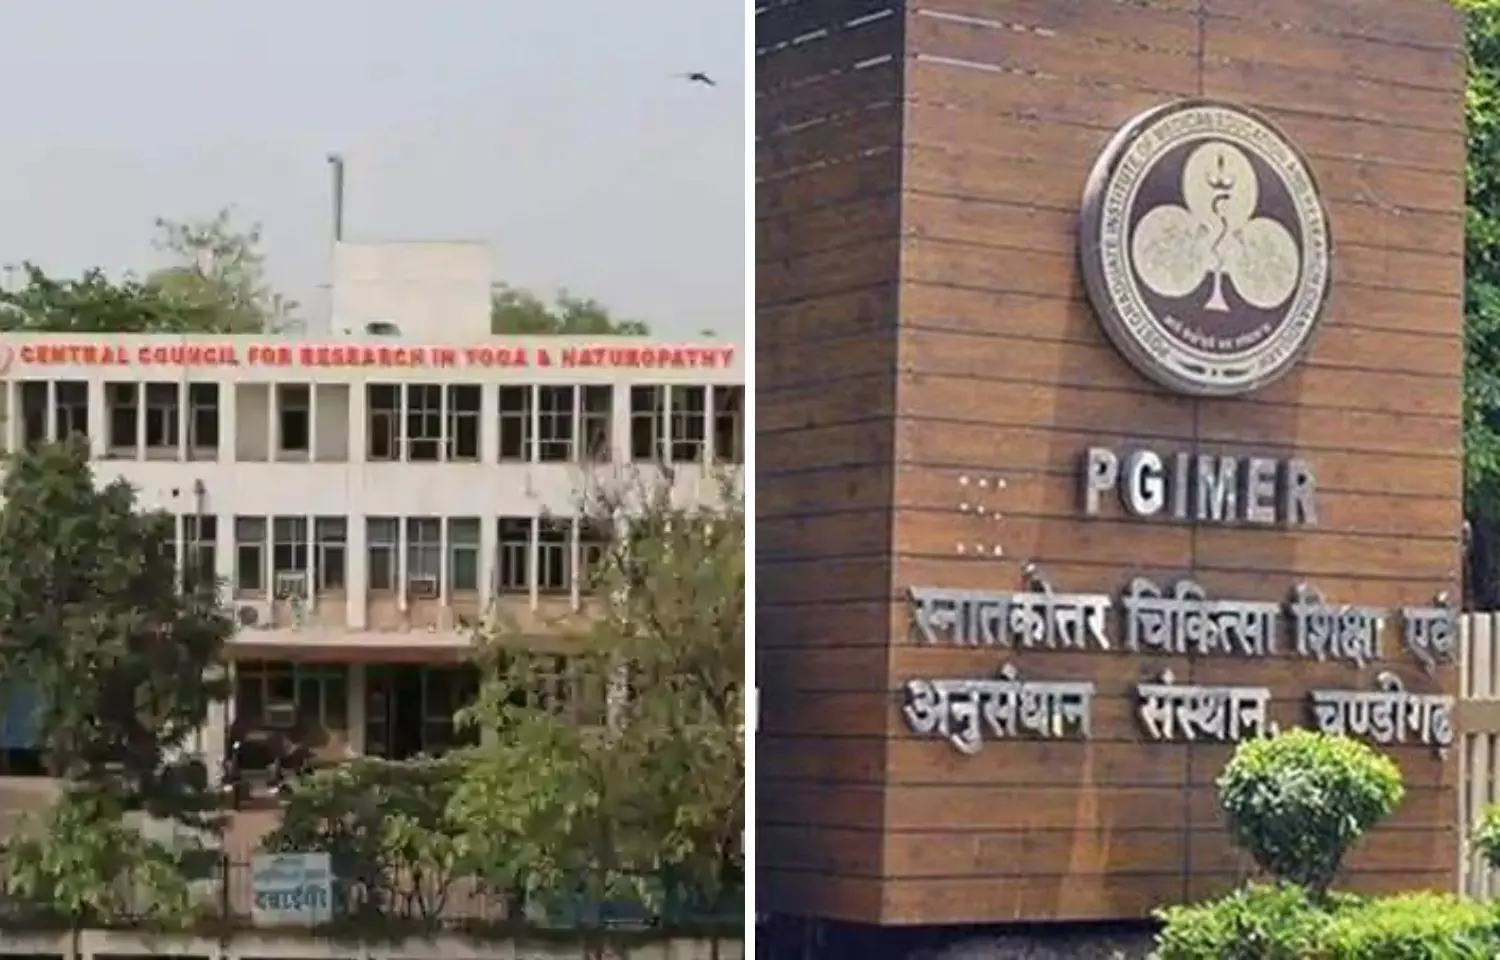 CCRYN, PGIMER Chandigarh collaborate to promote Yoga through joint research projects